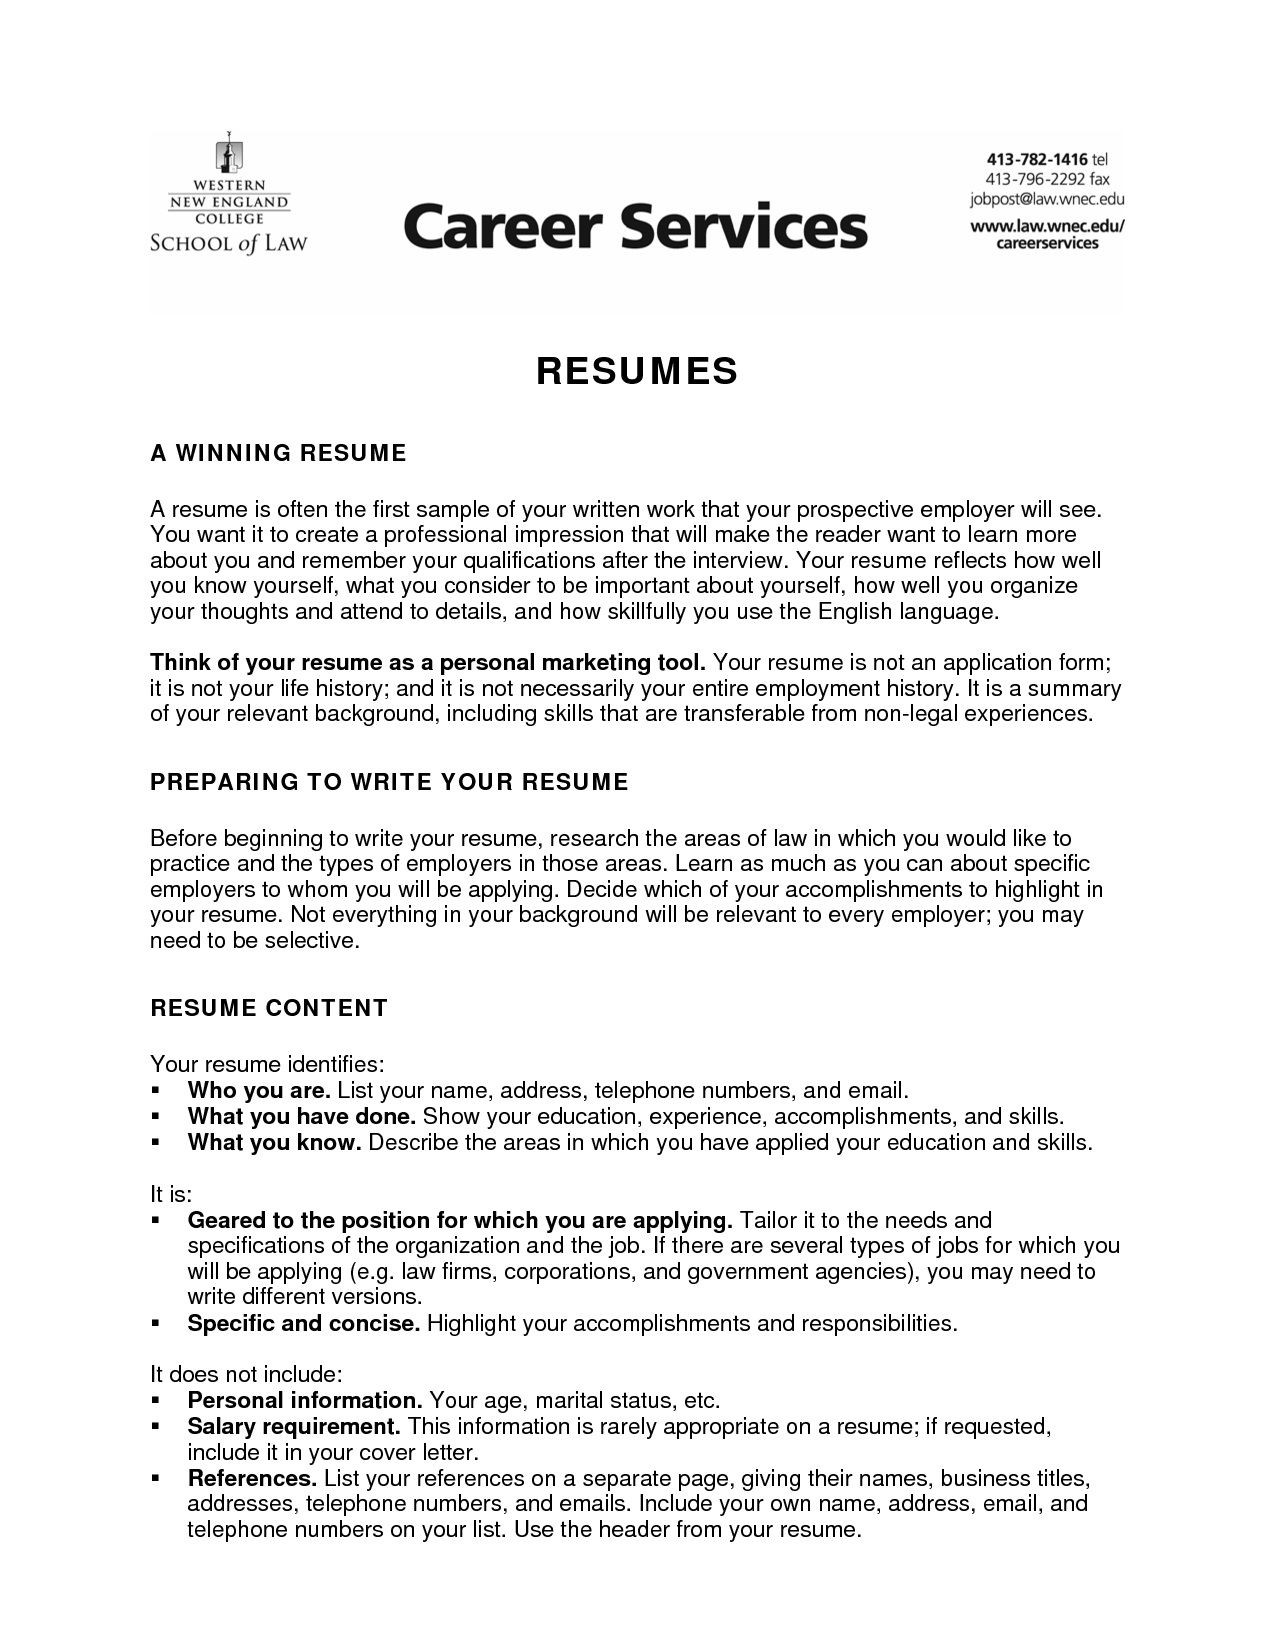 Sample Objective Statement for College Resume God Objective for Resume Colege Student